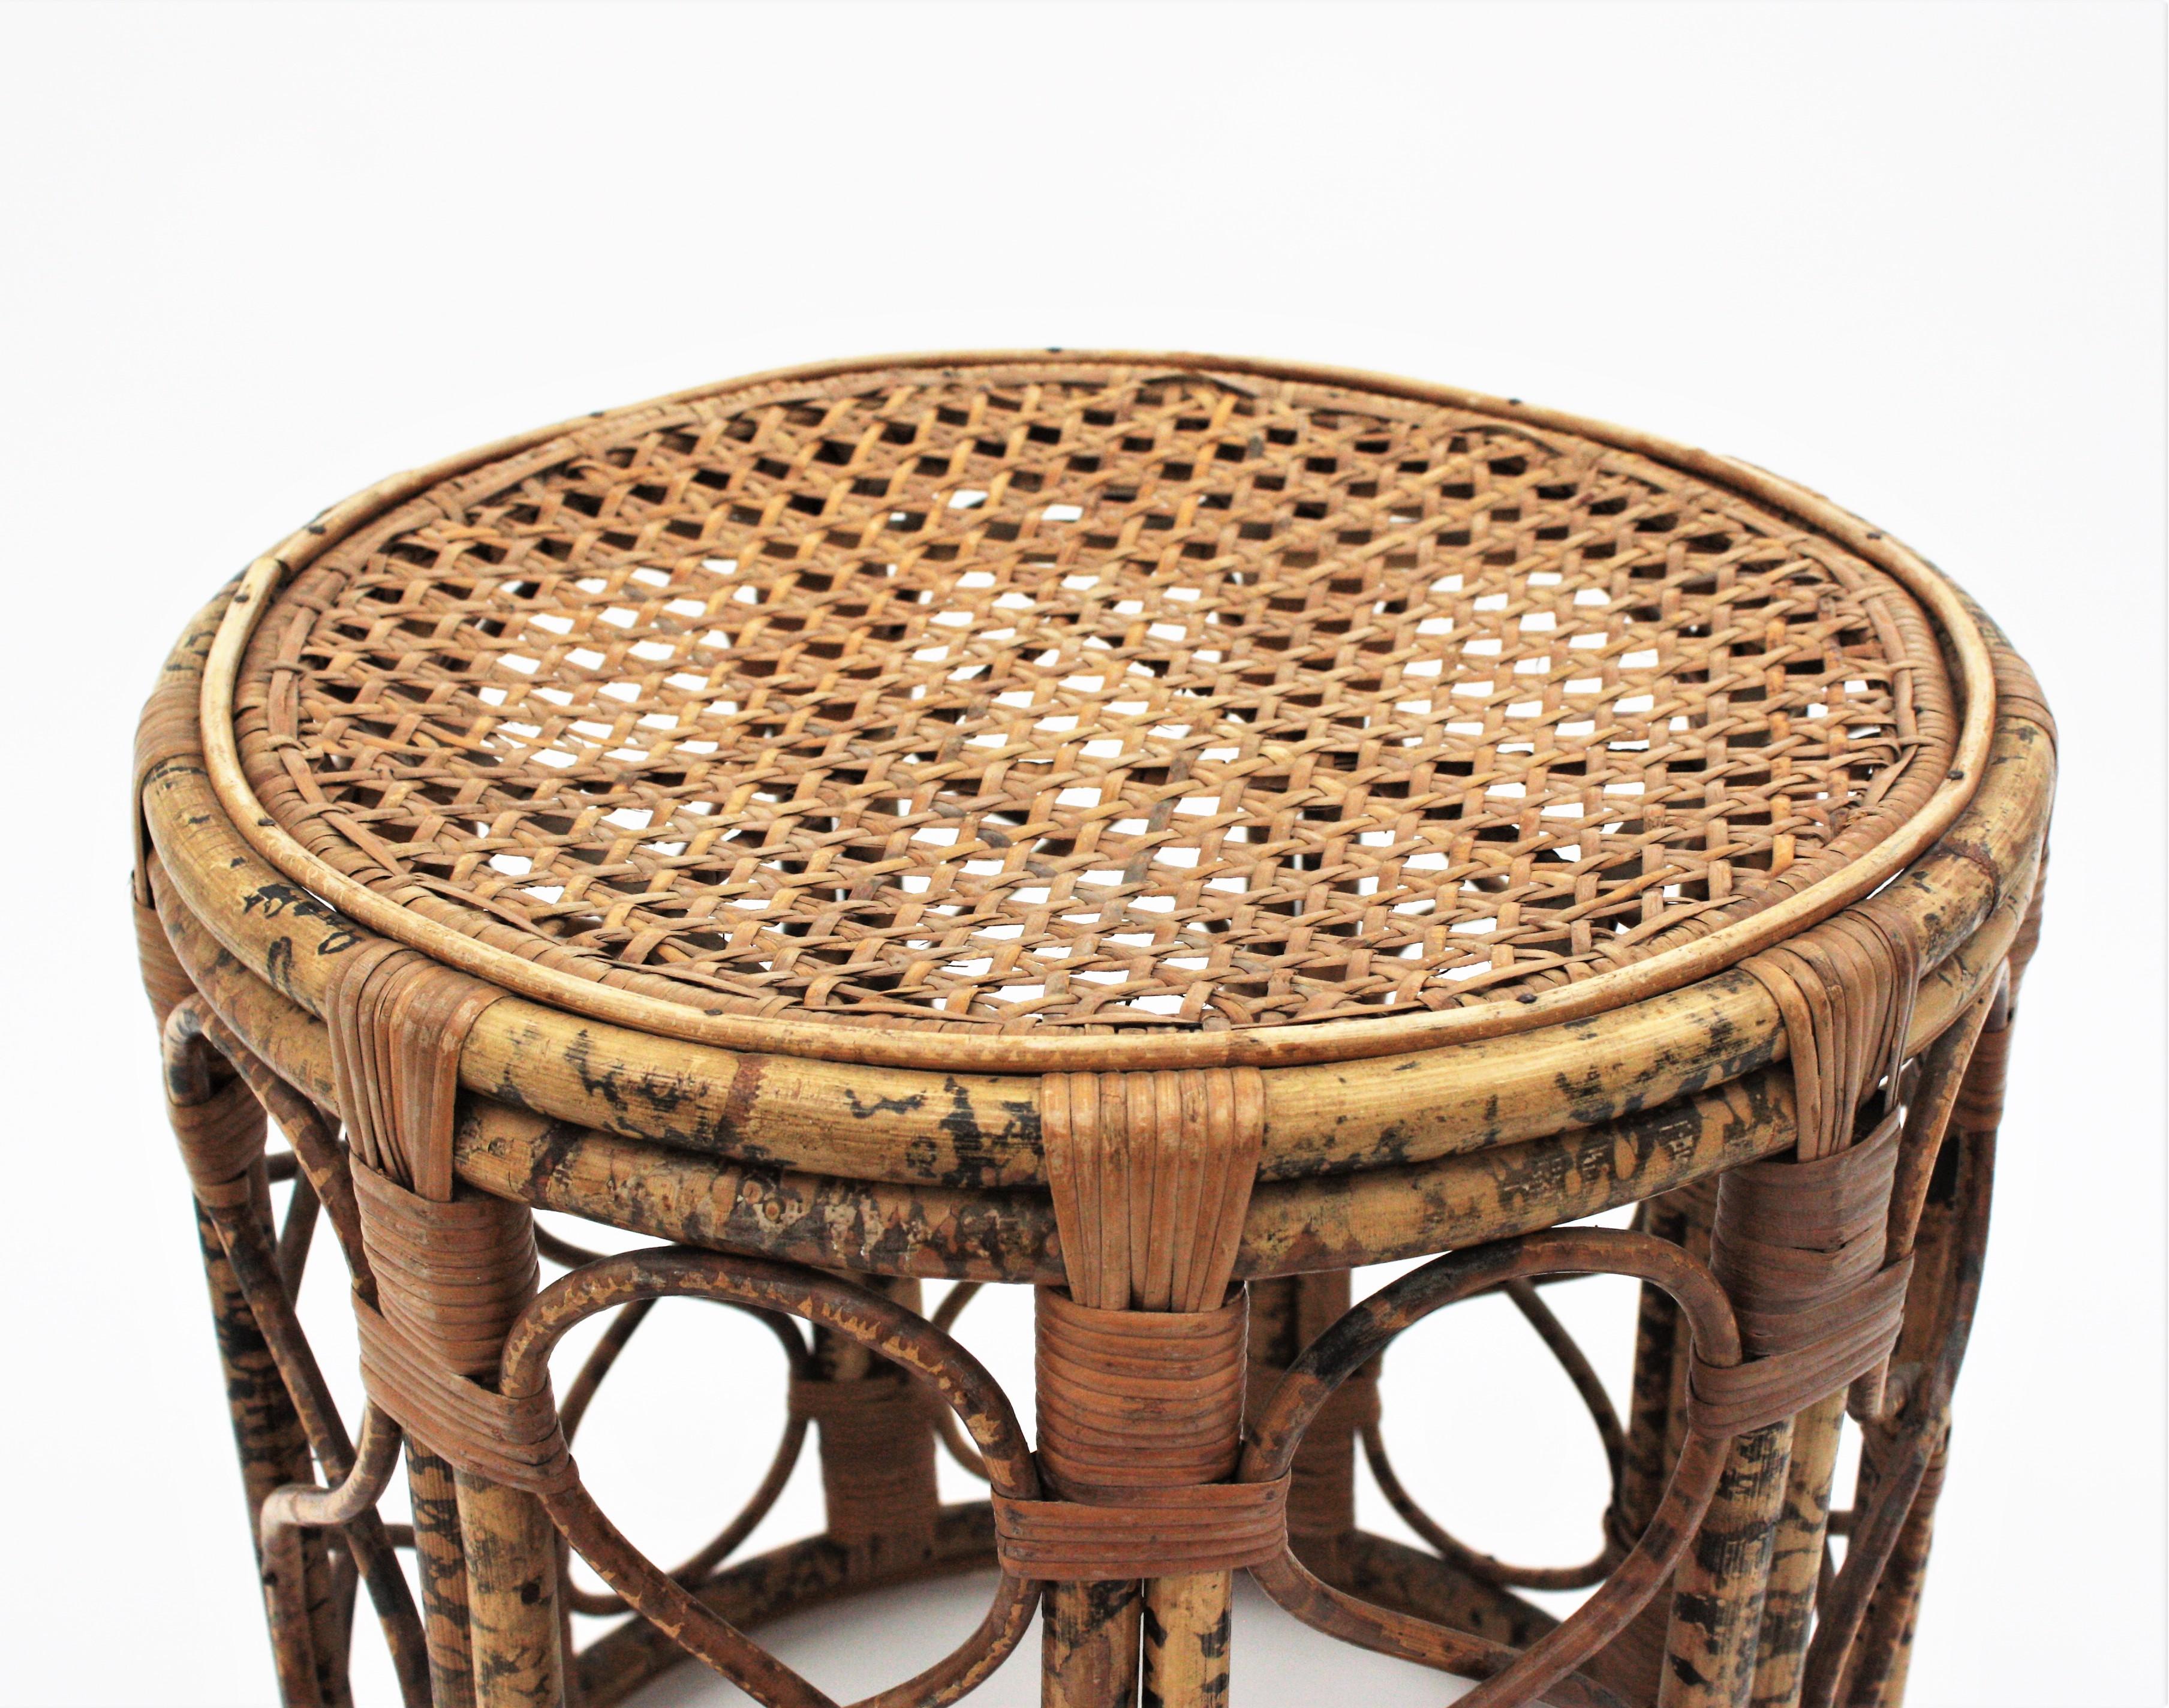 Hand-Woven French Side Table or Stool in Tiger Bamboo Rattan with Woven Wicker Top, 1940s For Sale